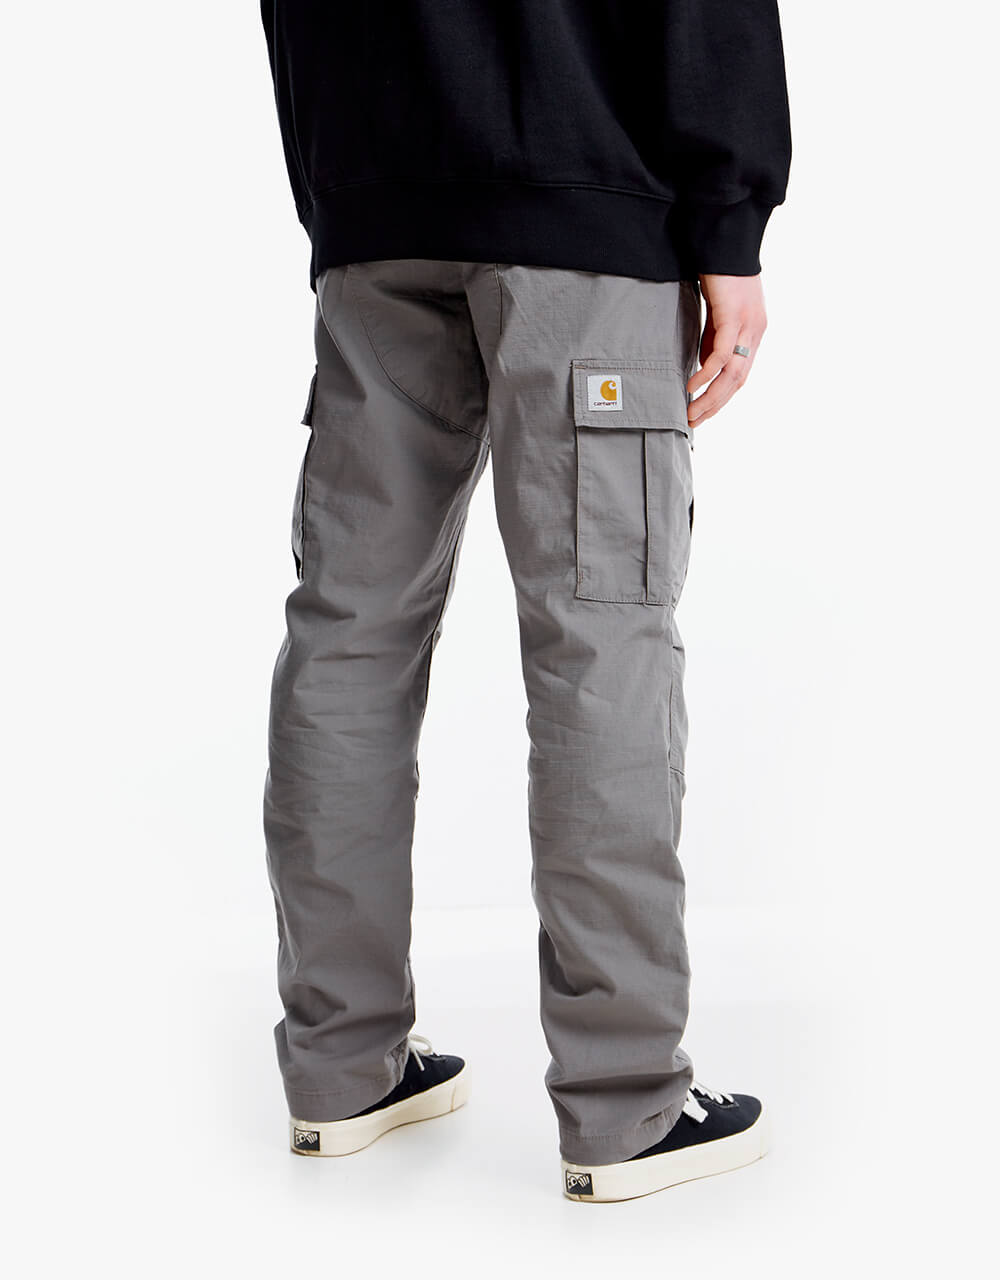 Carhartt WIP Aviation Pant - Anchor (Rinsed)